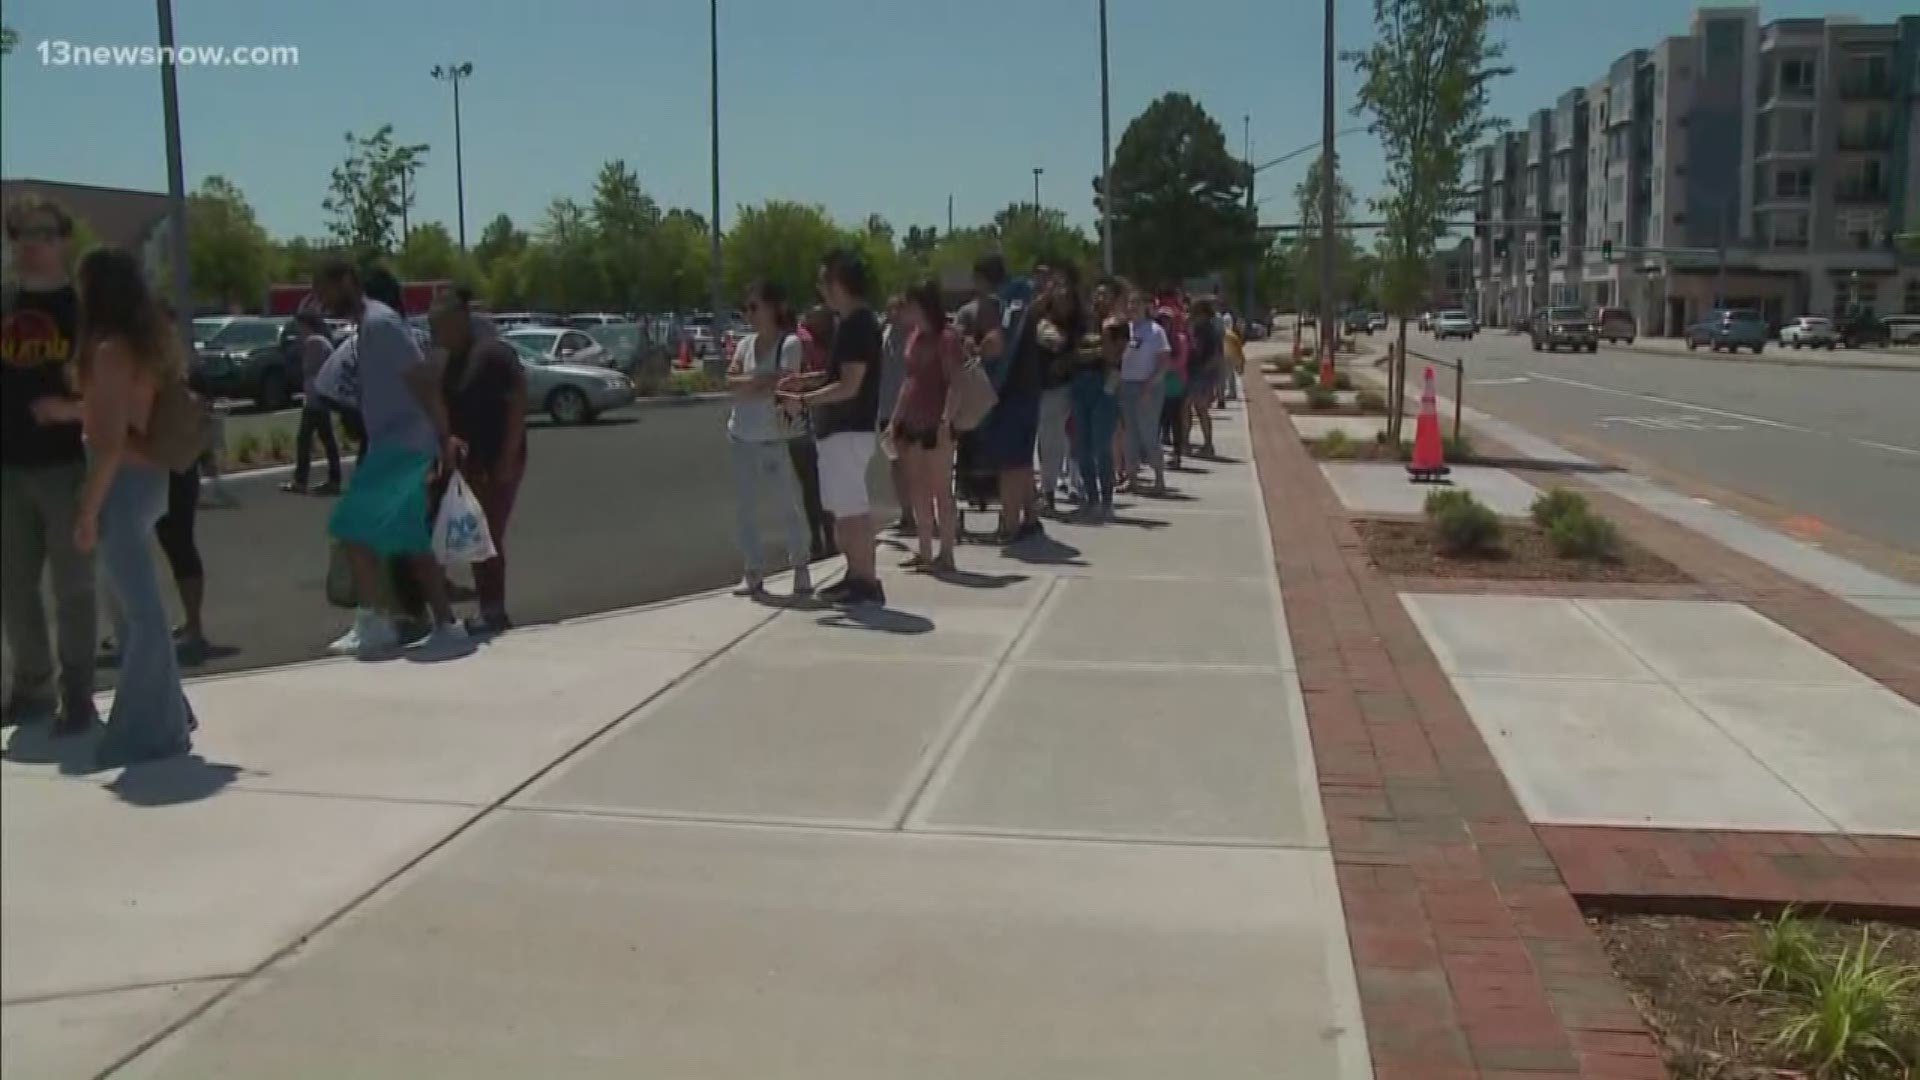 A line formed outside of the brand new Shake Shake in Virginia Beach's Town Center ahead of the restaurant's grand opening.